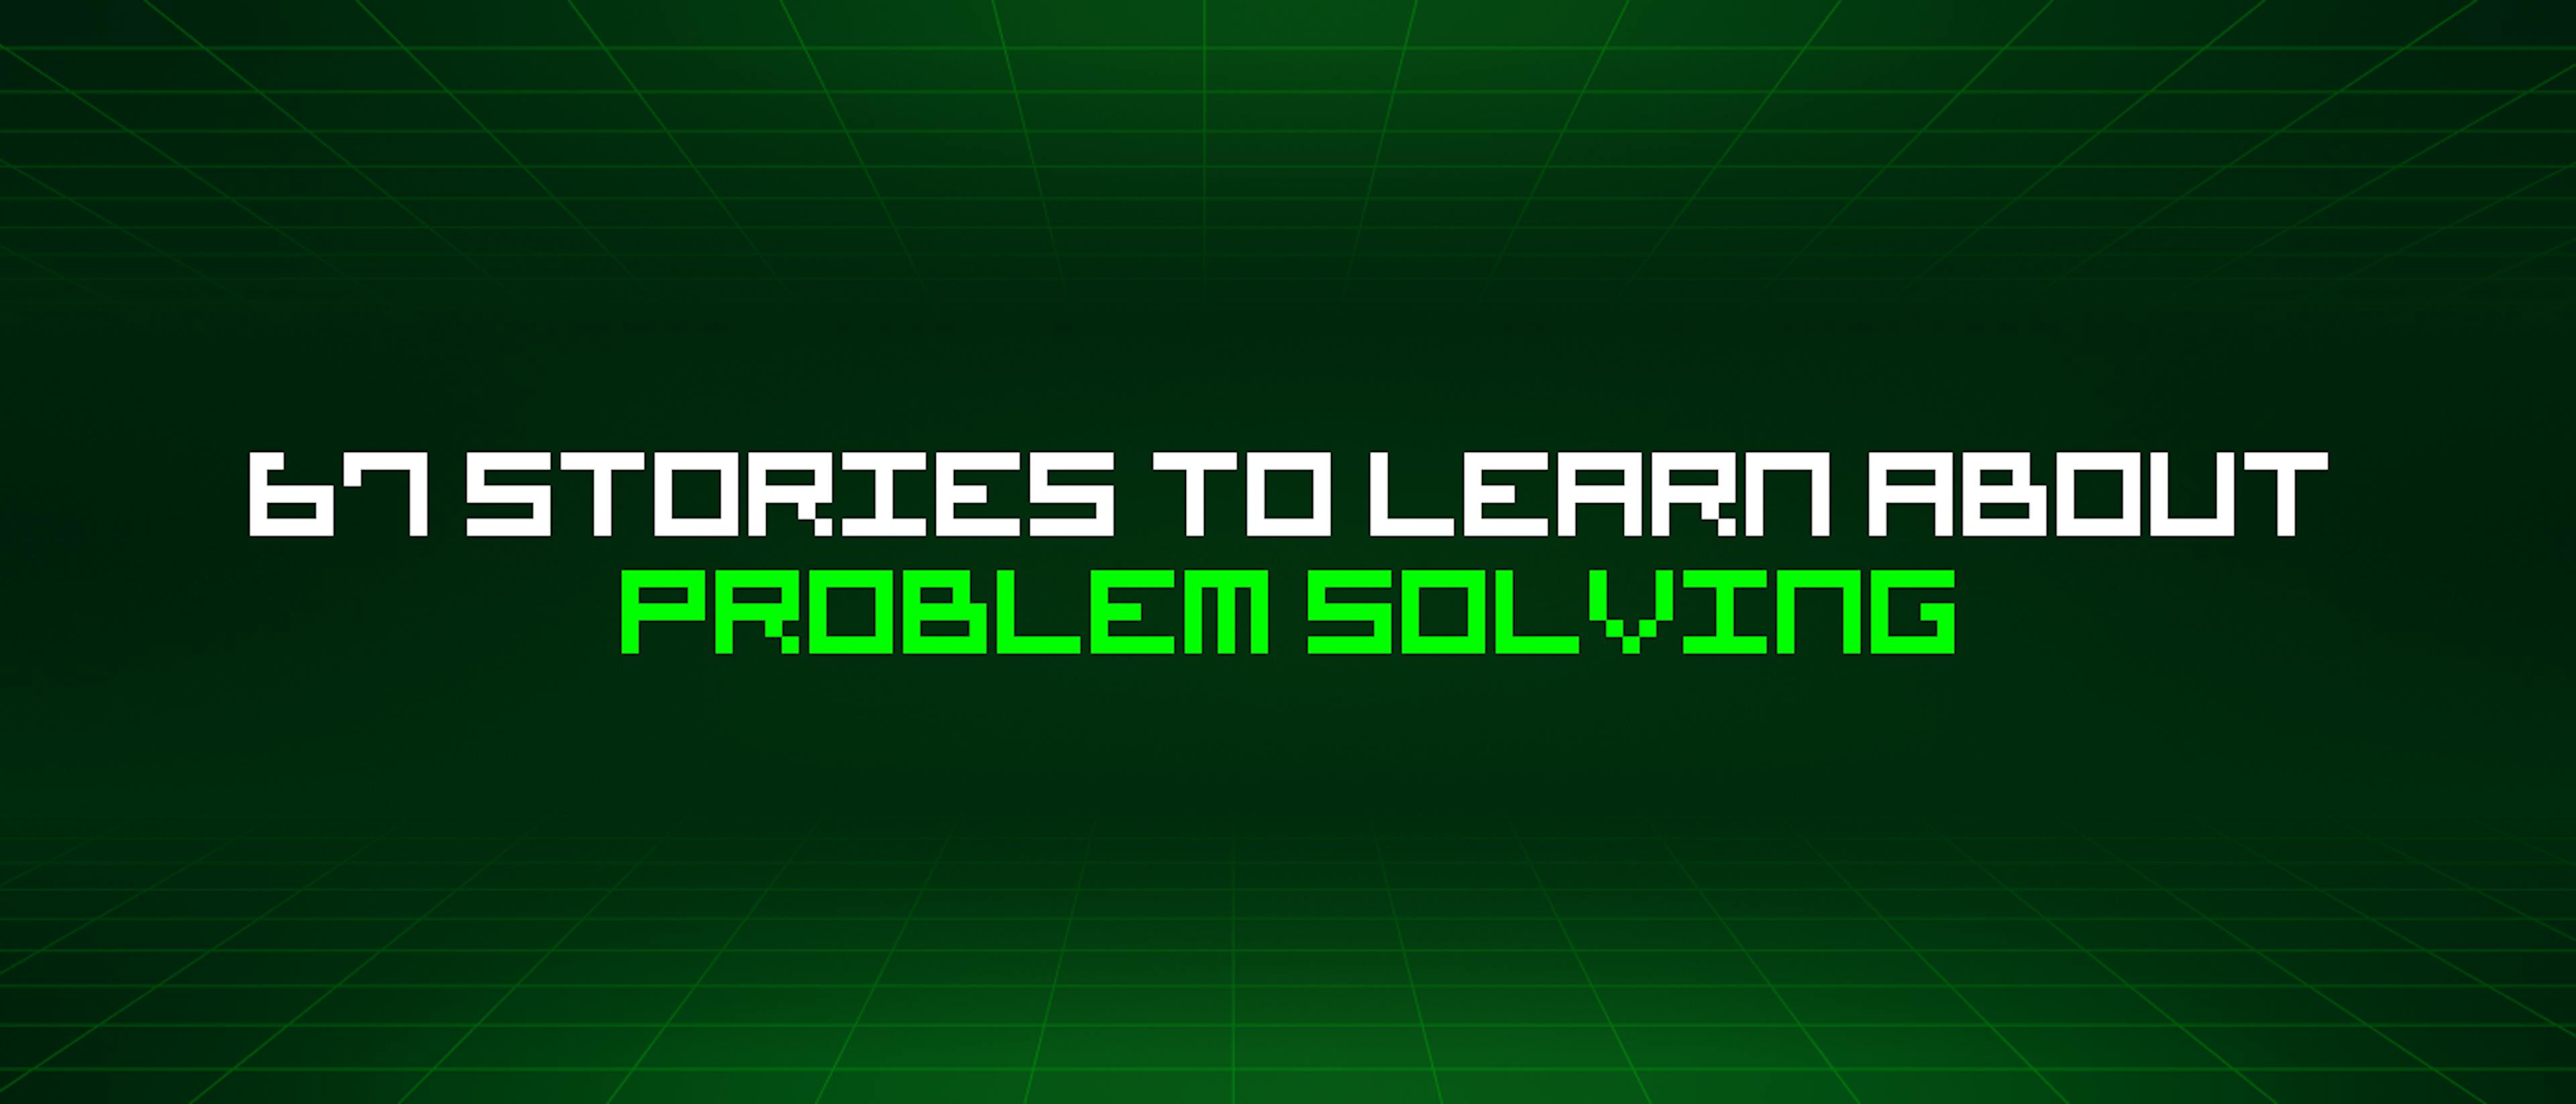 featured image - 67 Stories To Learn About Problem Solving